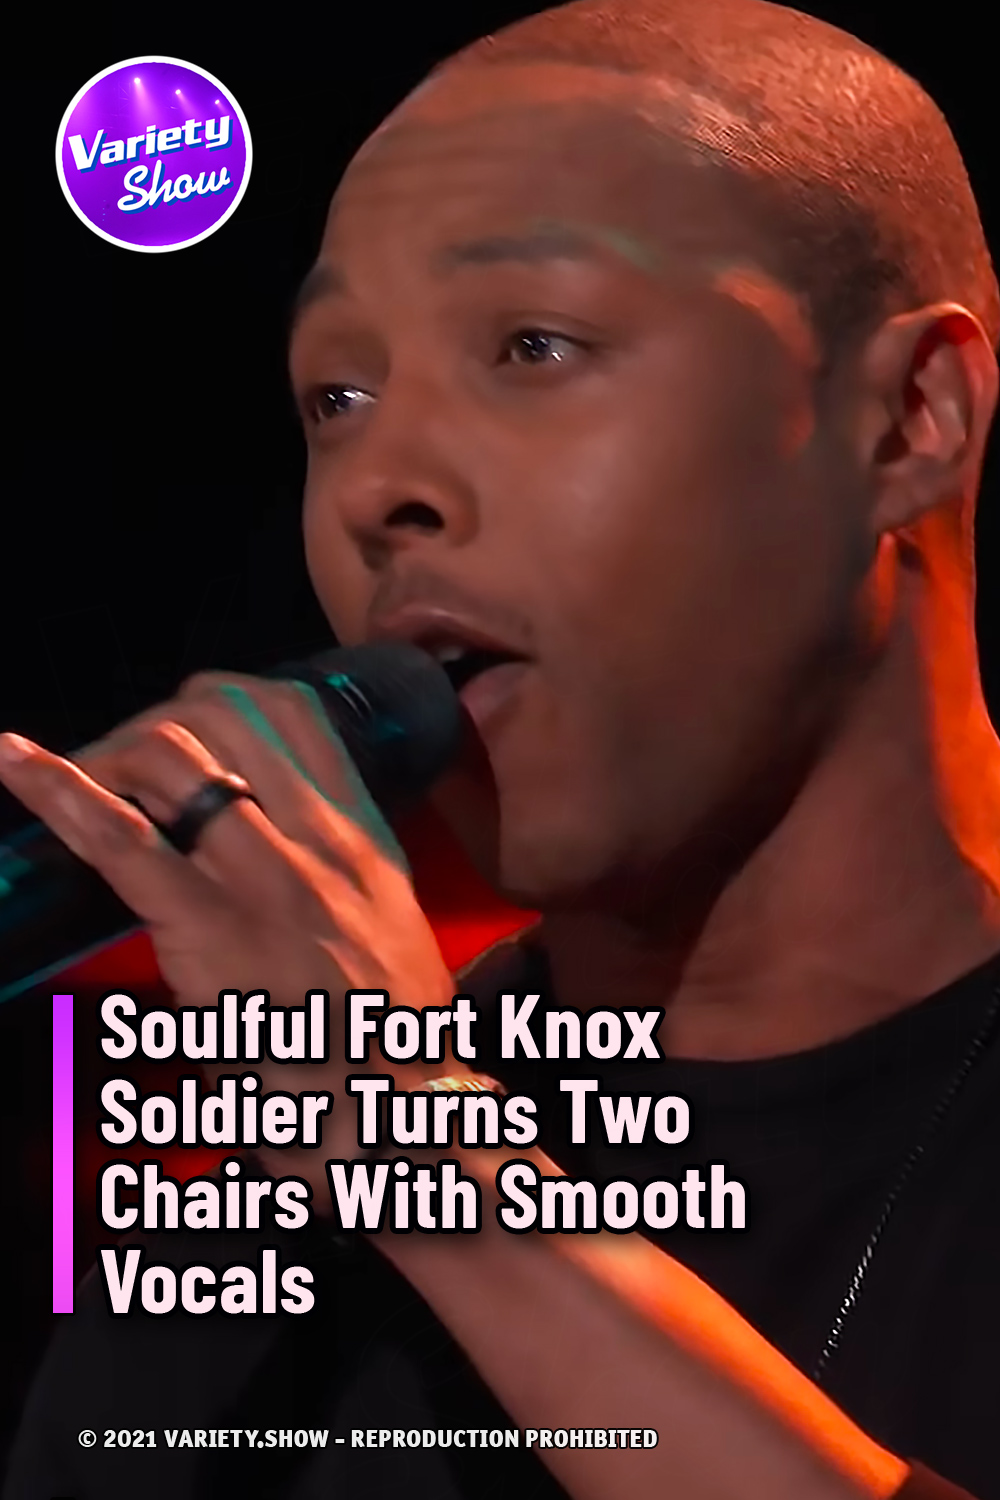 Soulful Fort Knox Soldier Turns Two Chairs With Smooth Vocals